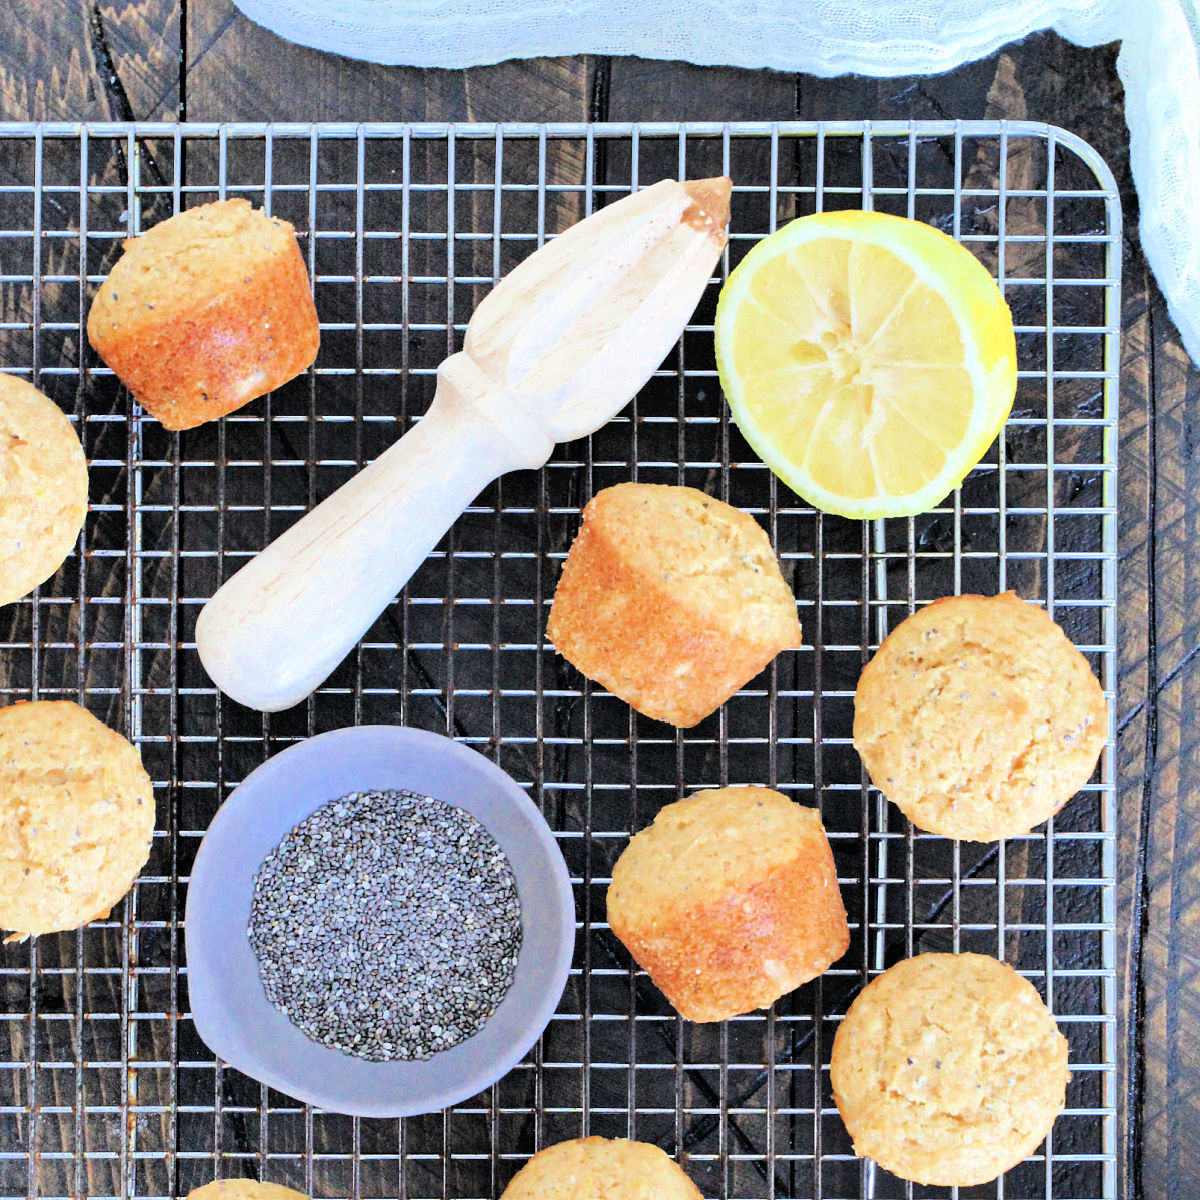 Lemon chia seed muffins on a baking rack with a bowl of chia seeds and a cut lemon.